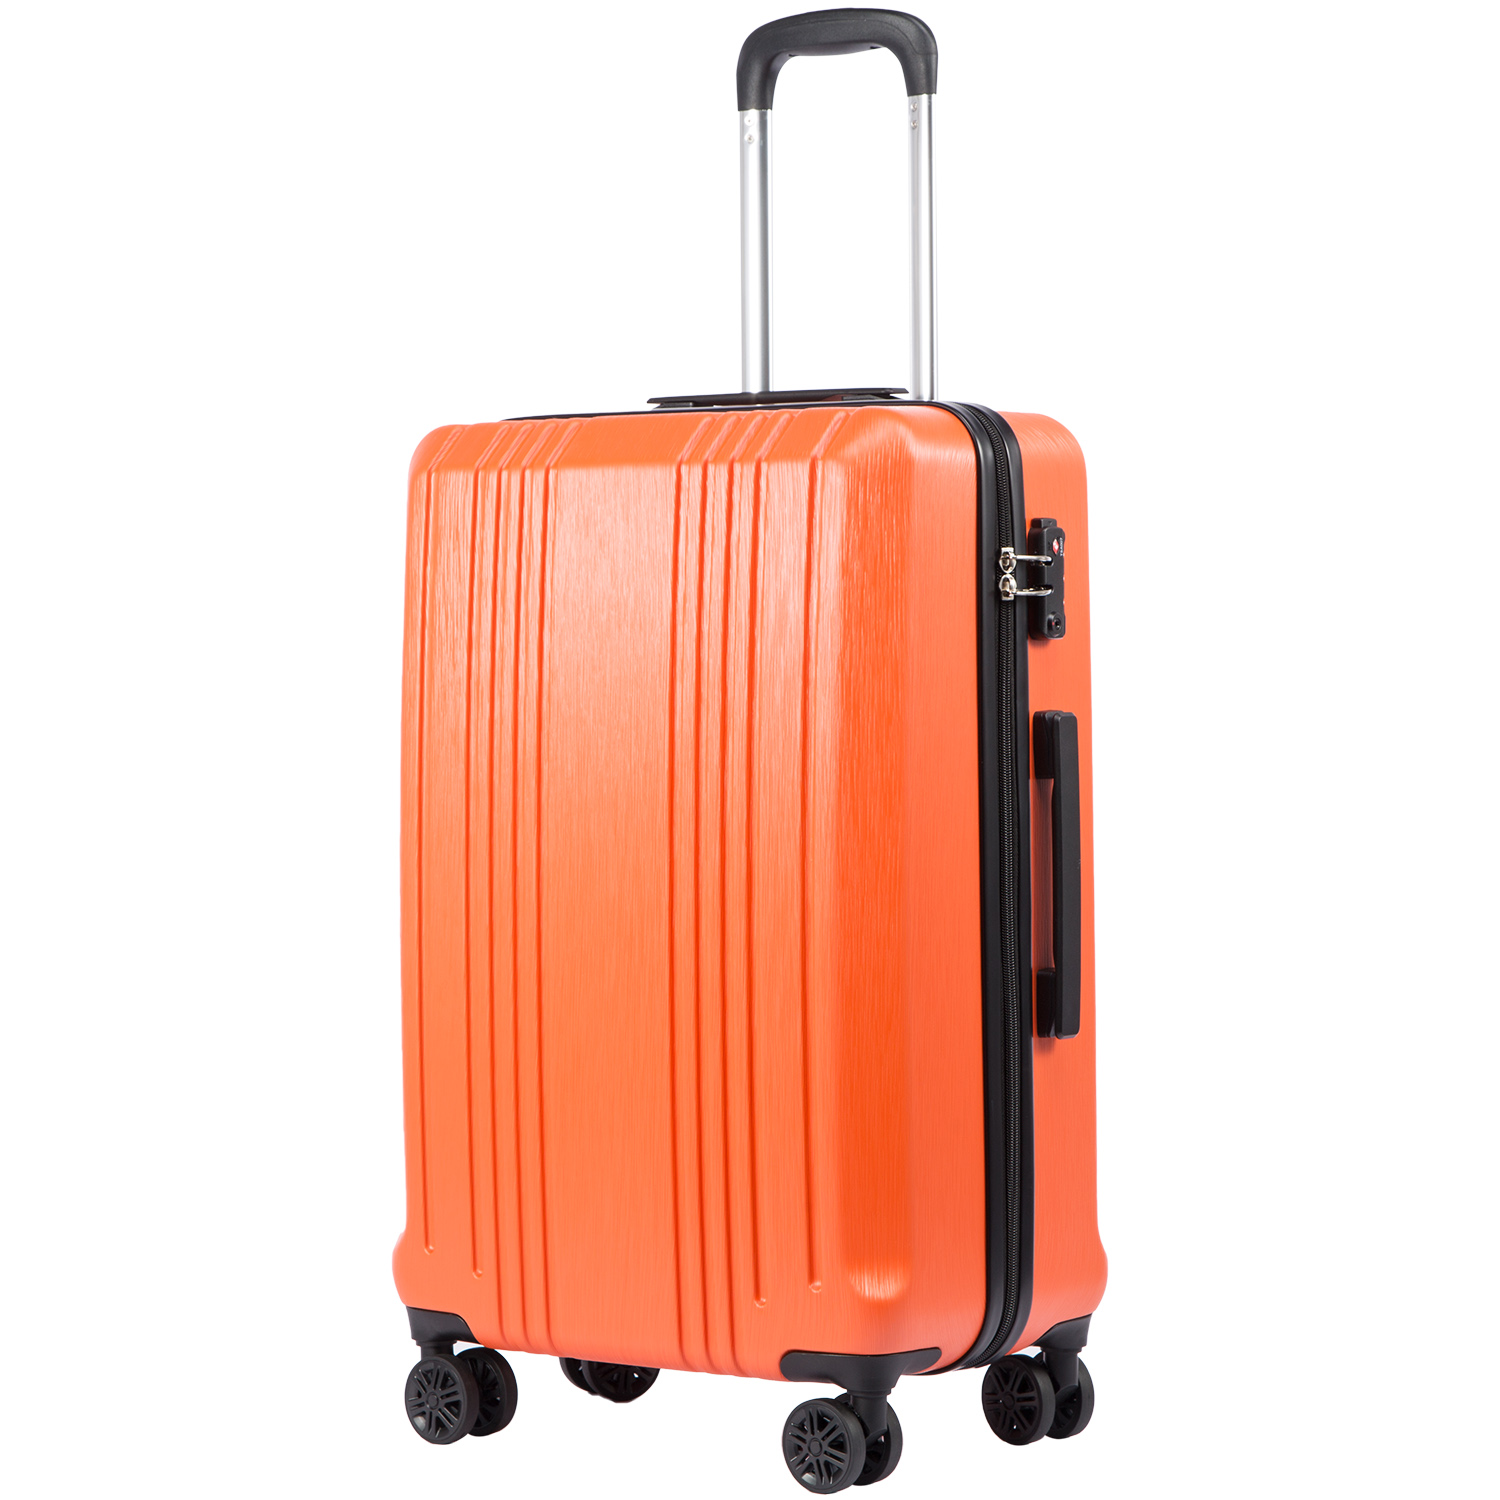 Coolife Luggage Suitcase PC+ABS with TSA Lock Spinner Carry on Hardshell Lightweight 20in 24in 28in  YD60S/M/L